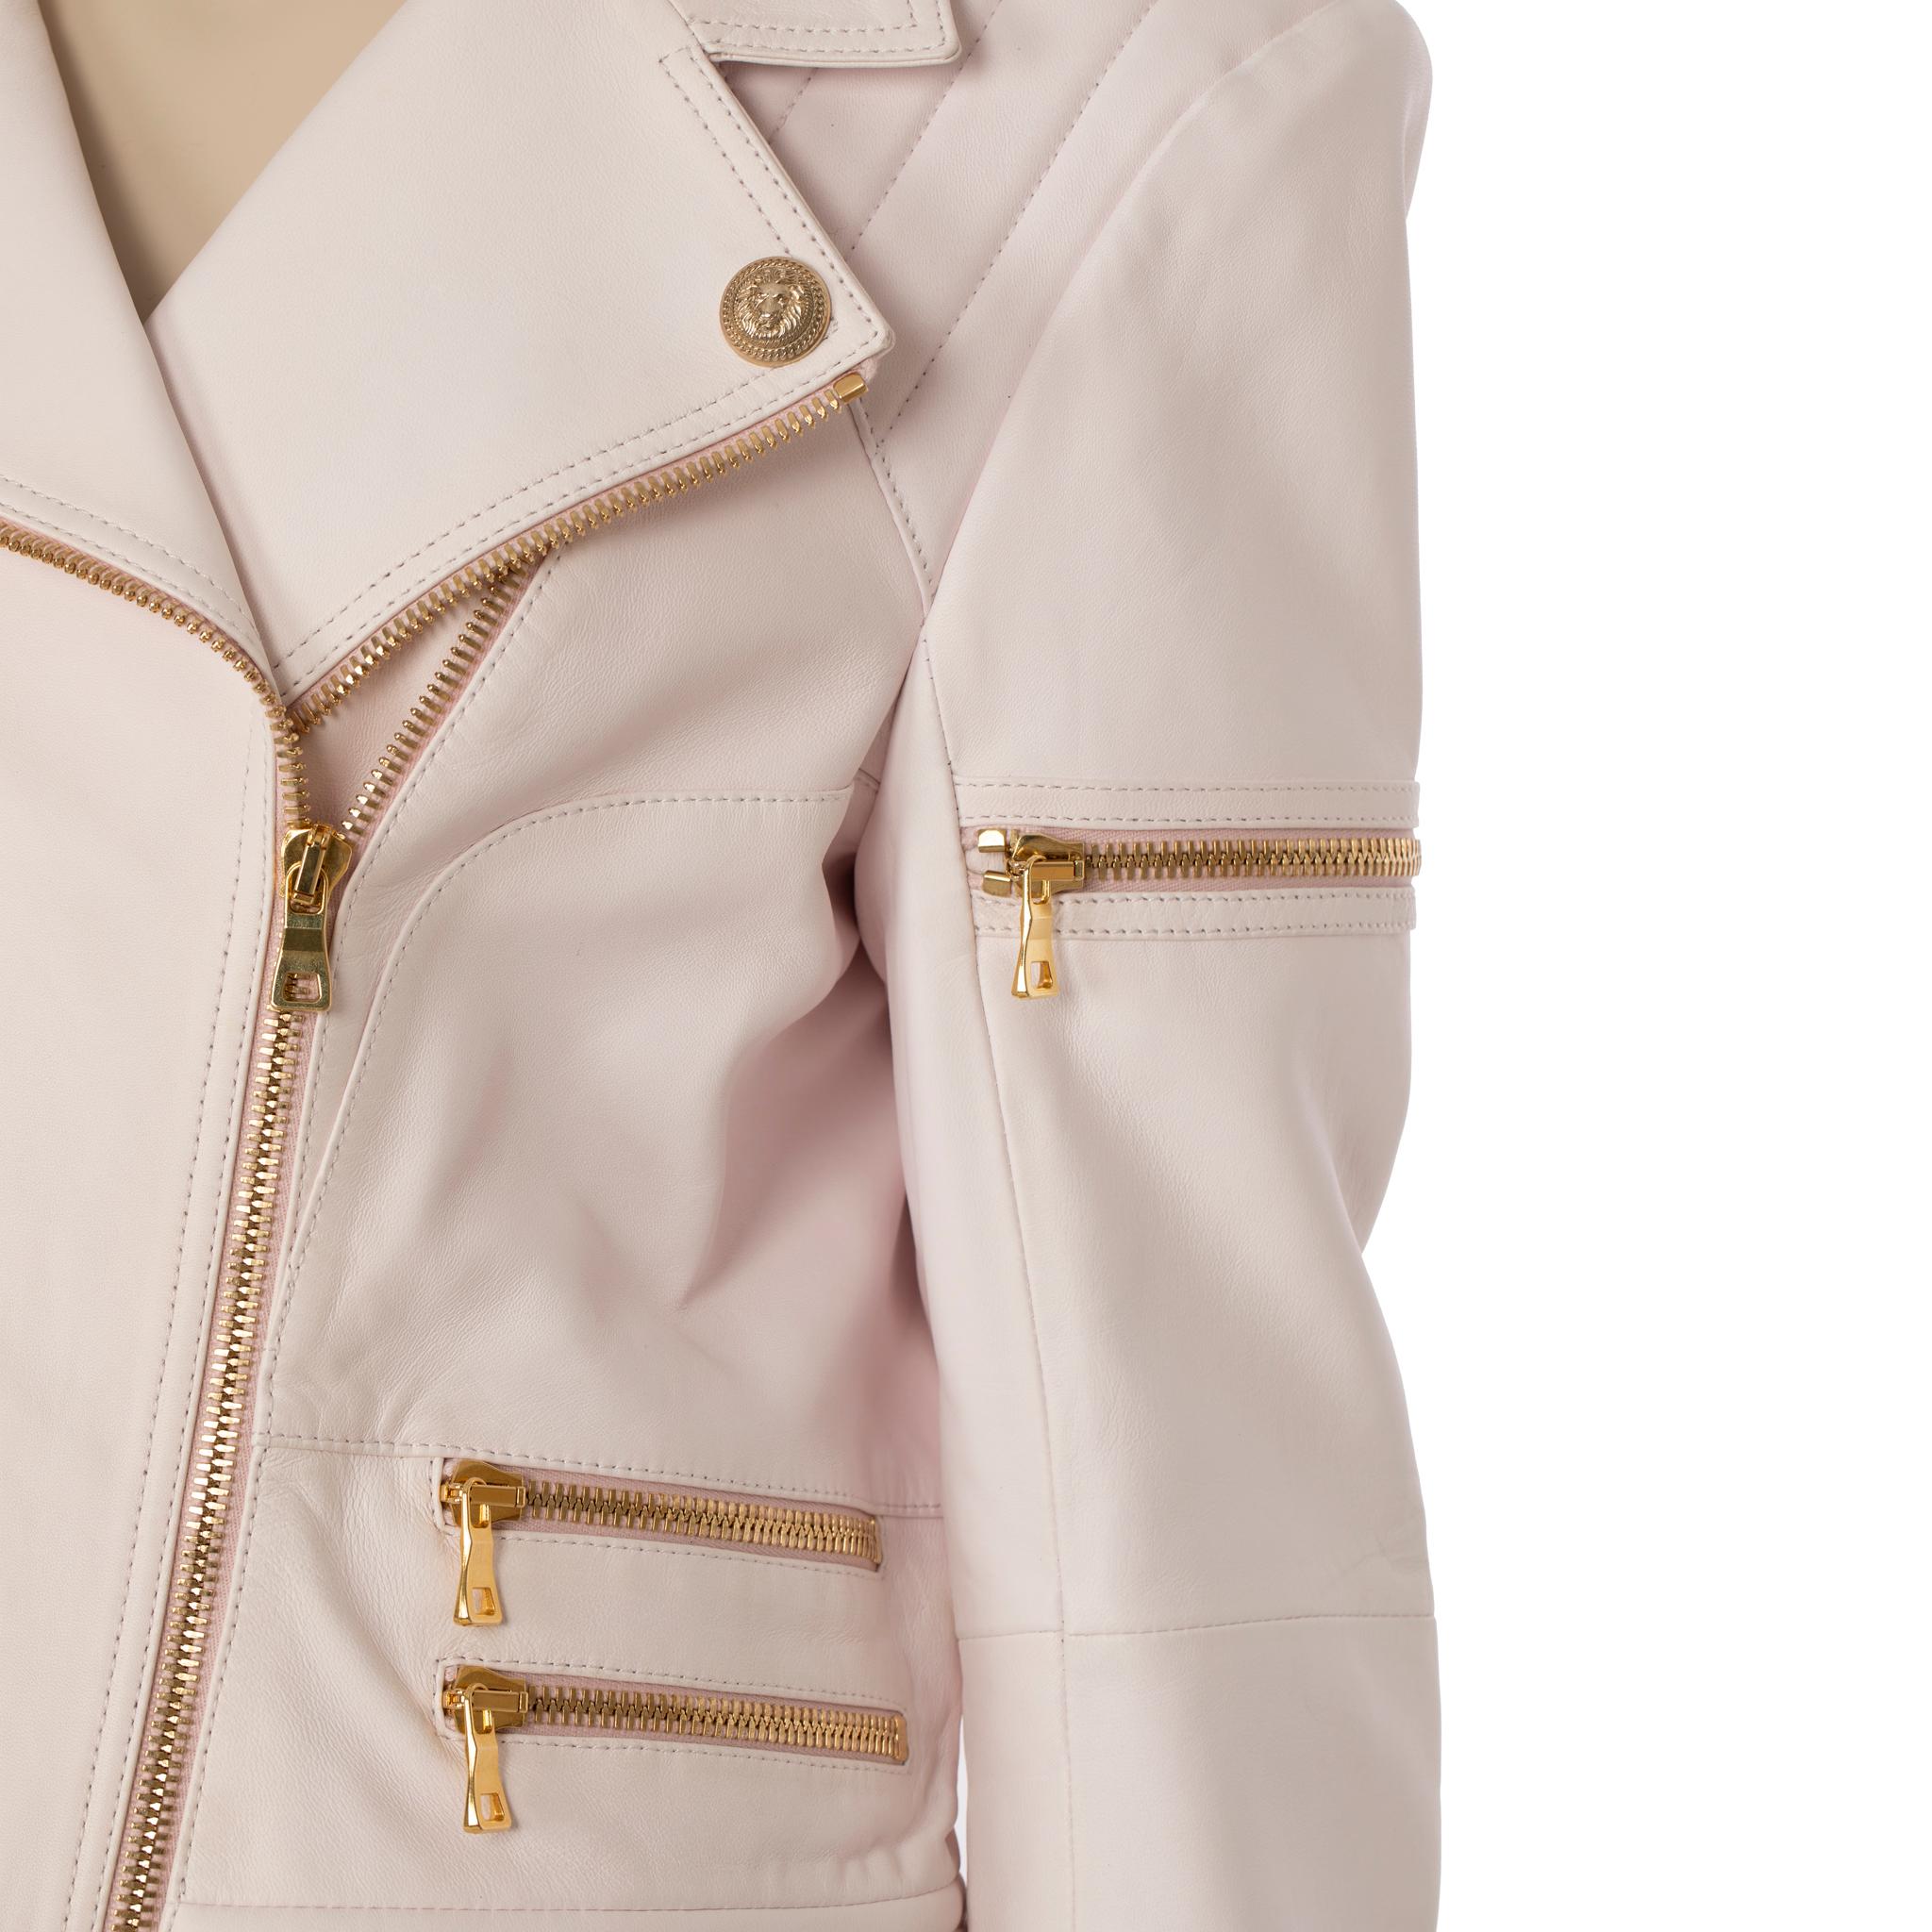 Balmain Pale Pink Leather Biker Jacket 44 FR In Good Condition For Sale In DOUBLE BAY, NSW